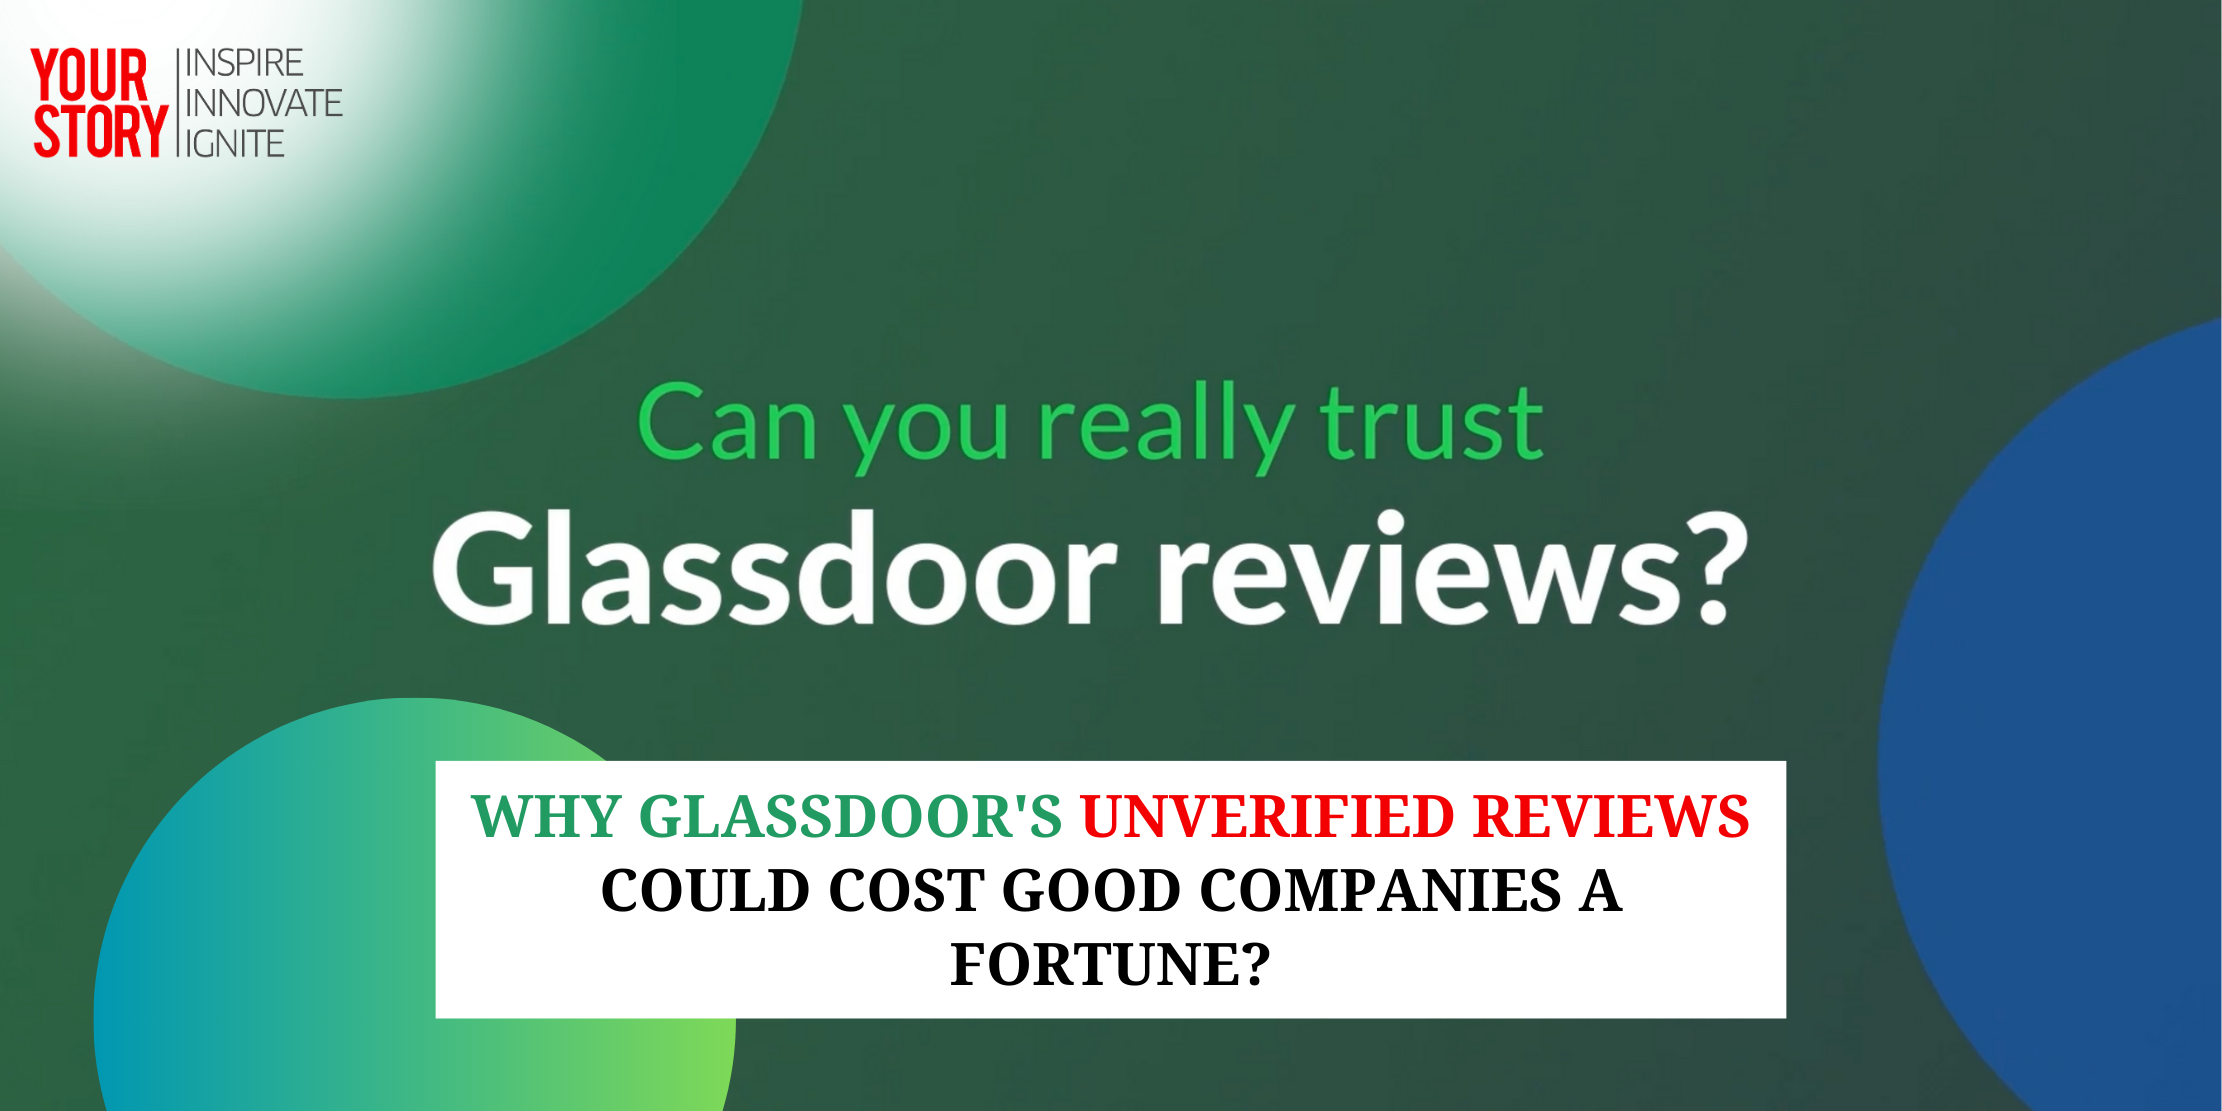 Why GlassDoor's Unverified Reviews Could Cost Good Companies a Fortune?